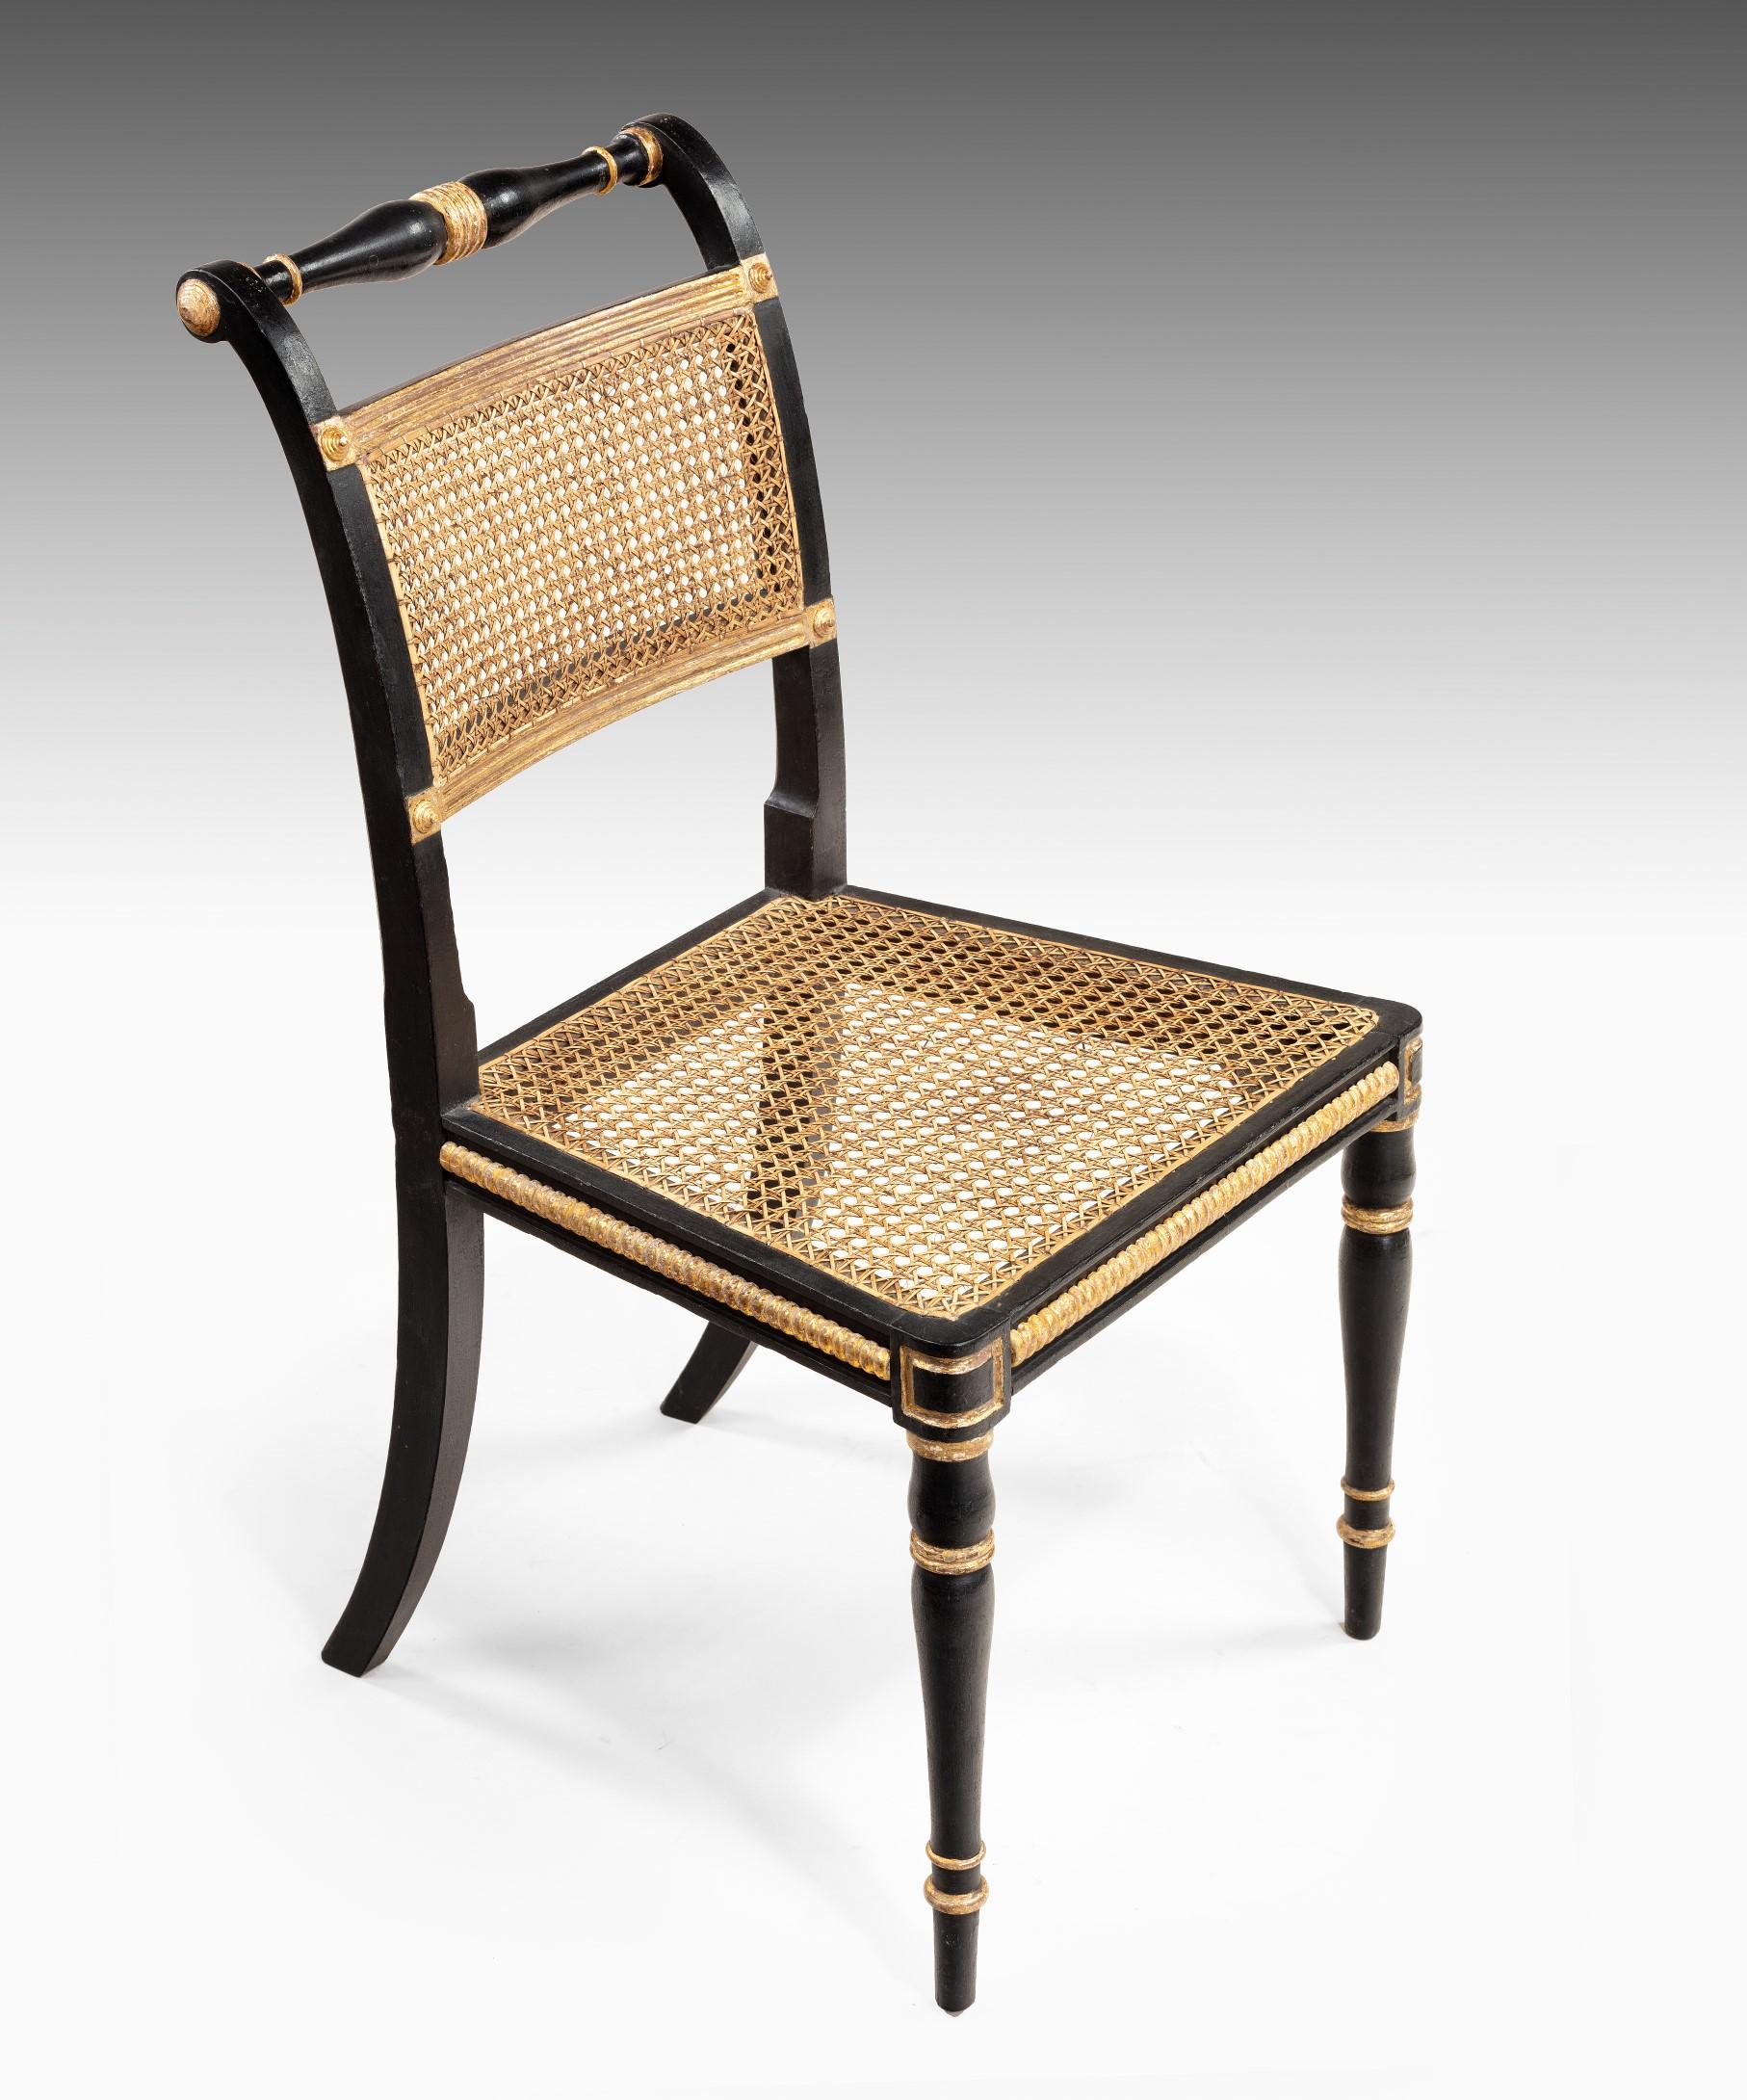 Early 19th Century Set of Twelve Regency Dining Chairs in Ebonized and Gilded Decoration